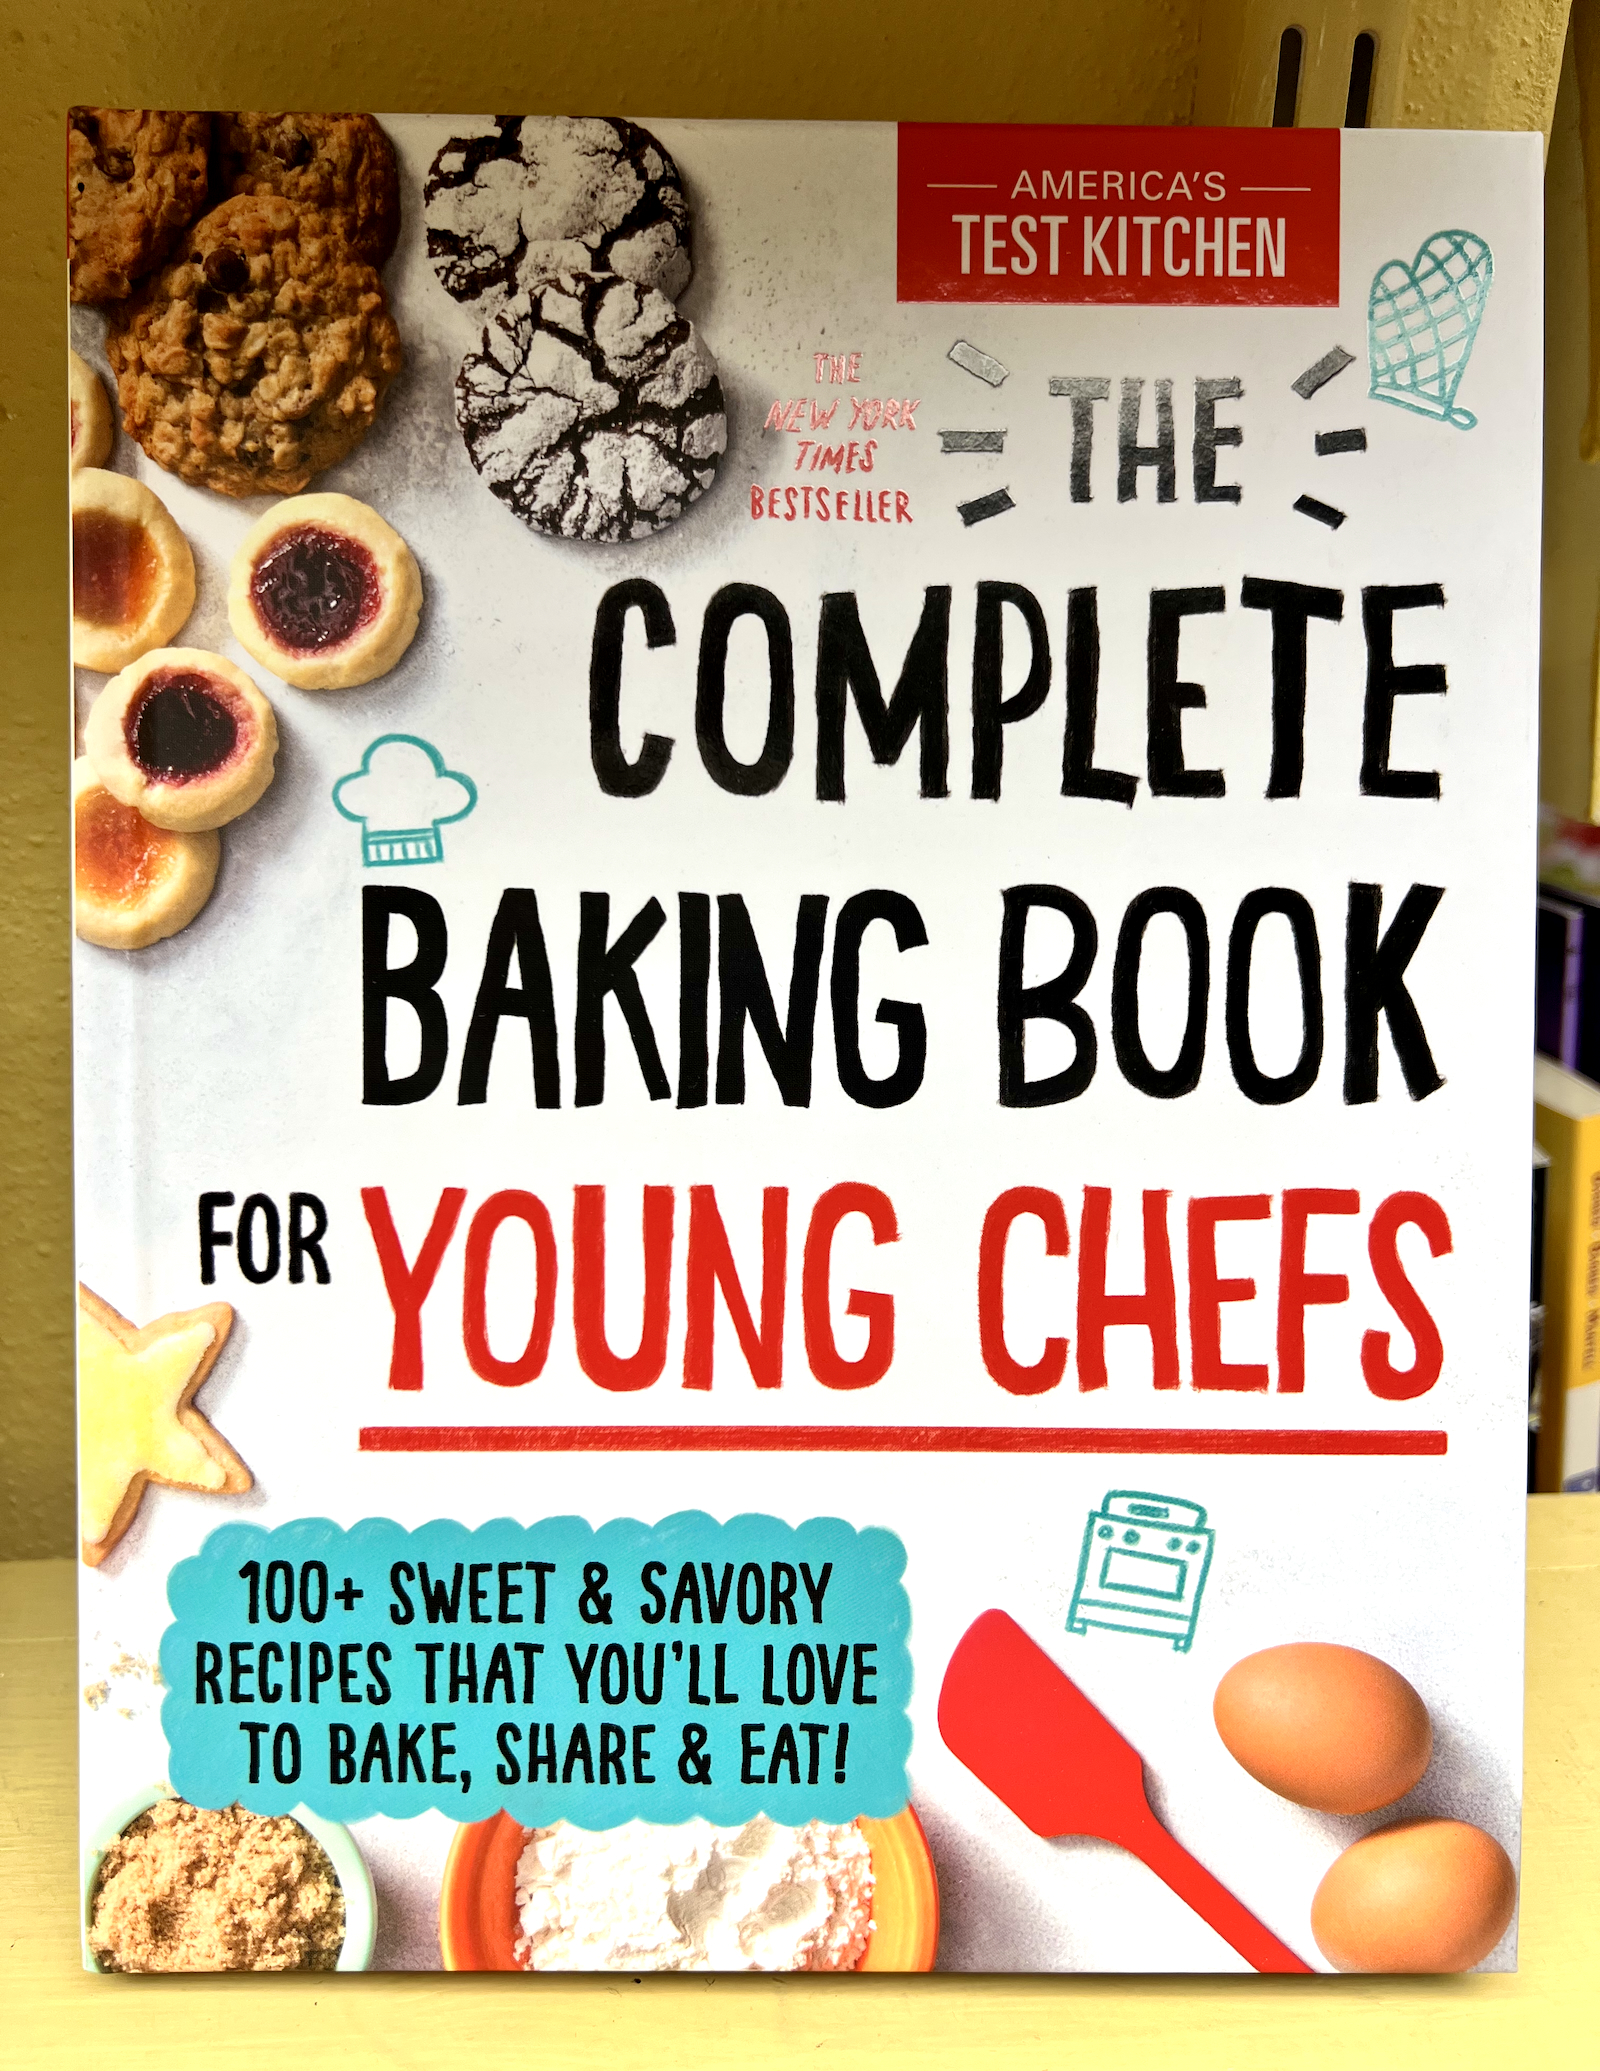 America's Test Kitchen Complete Baking Book for Young Chefs